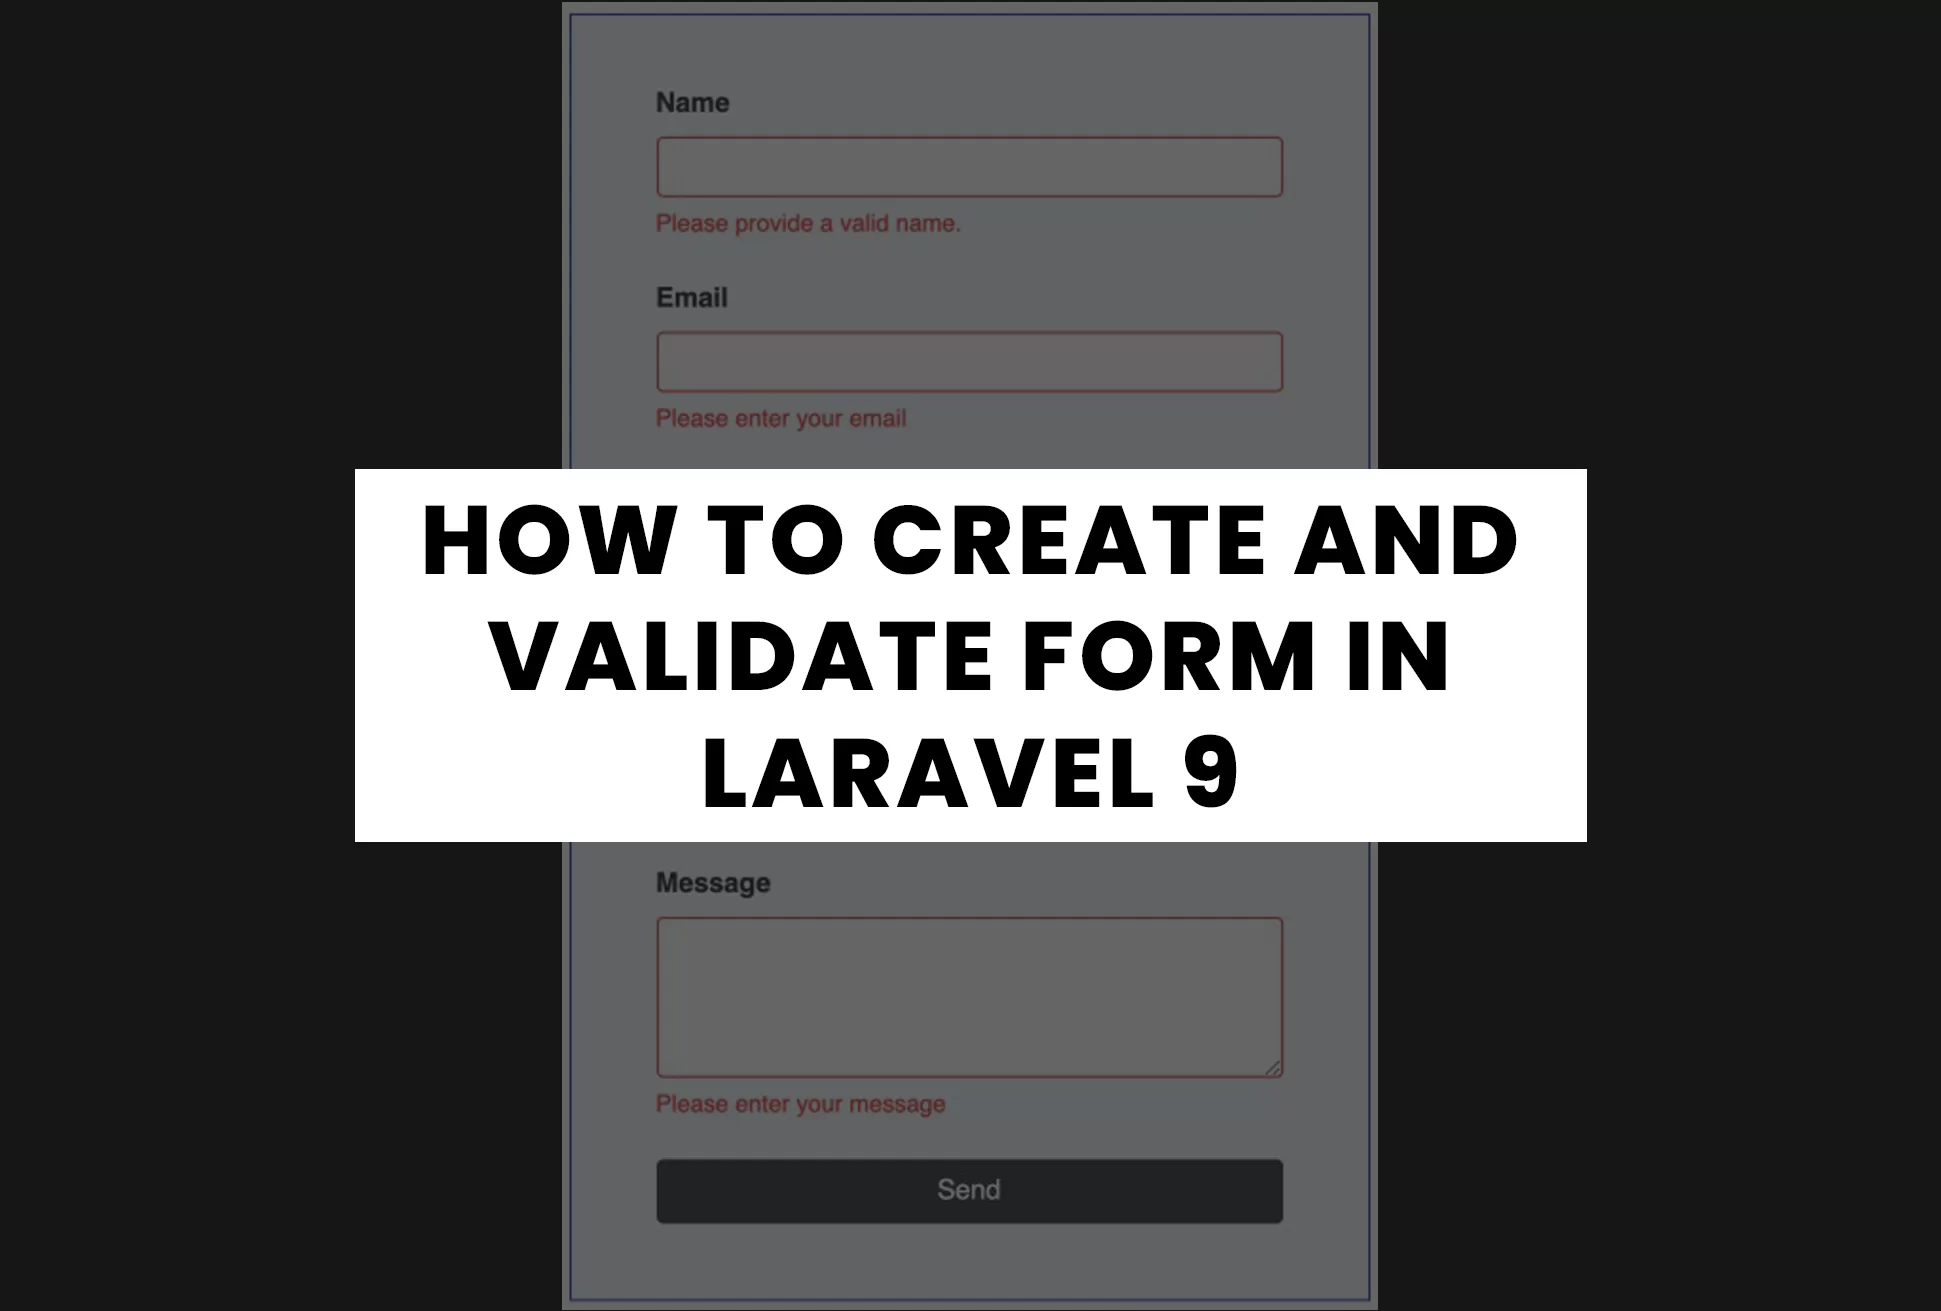 How To Create and Validate Form in Laravel 9